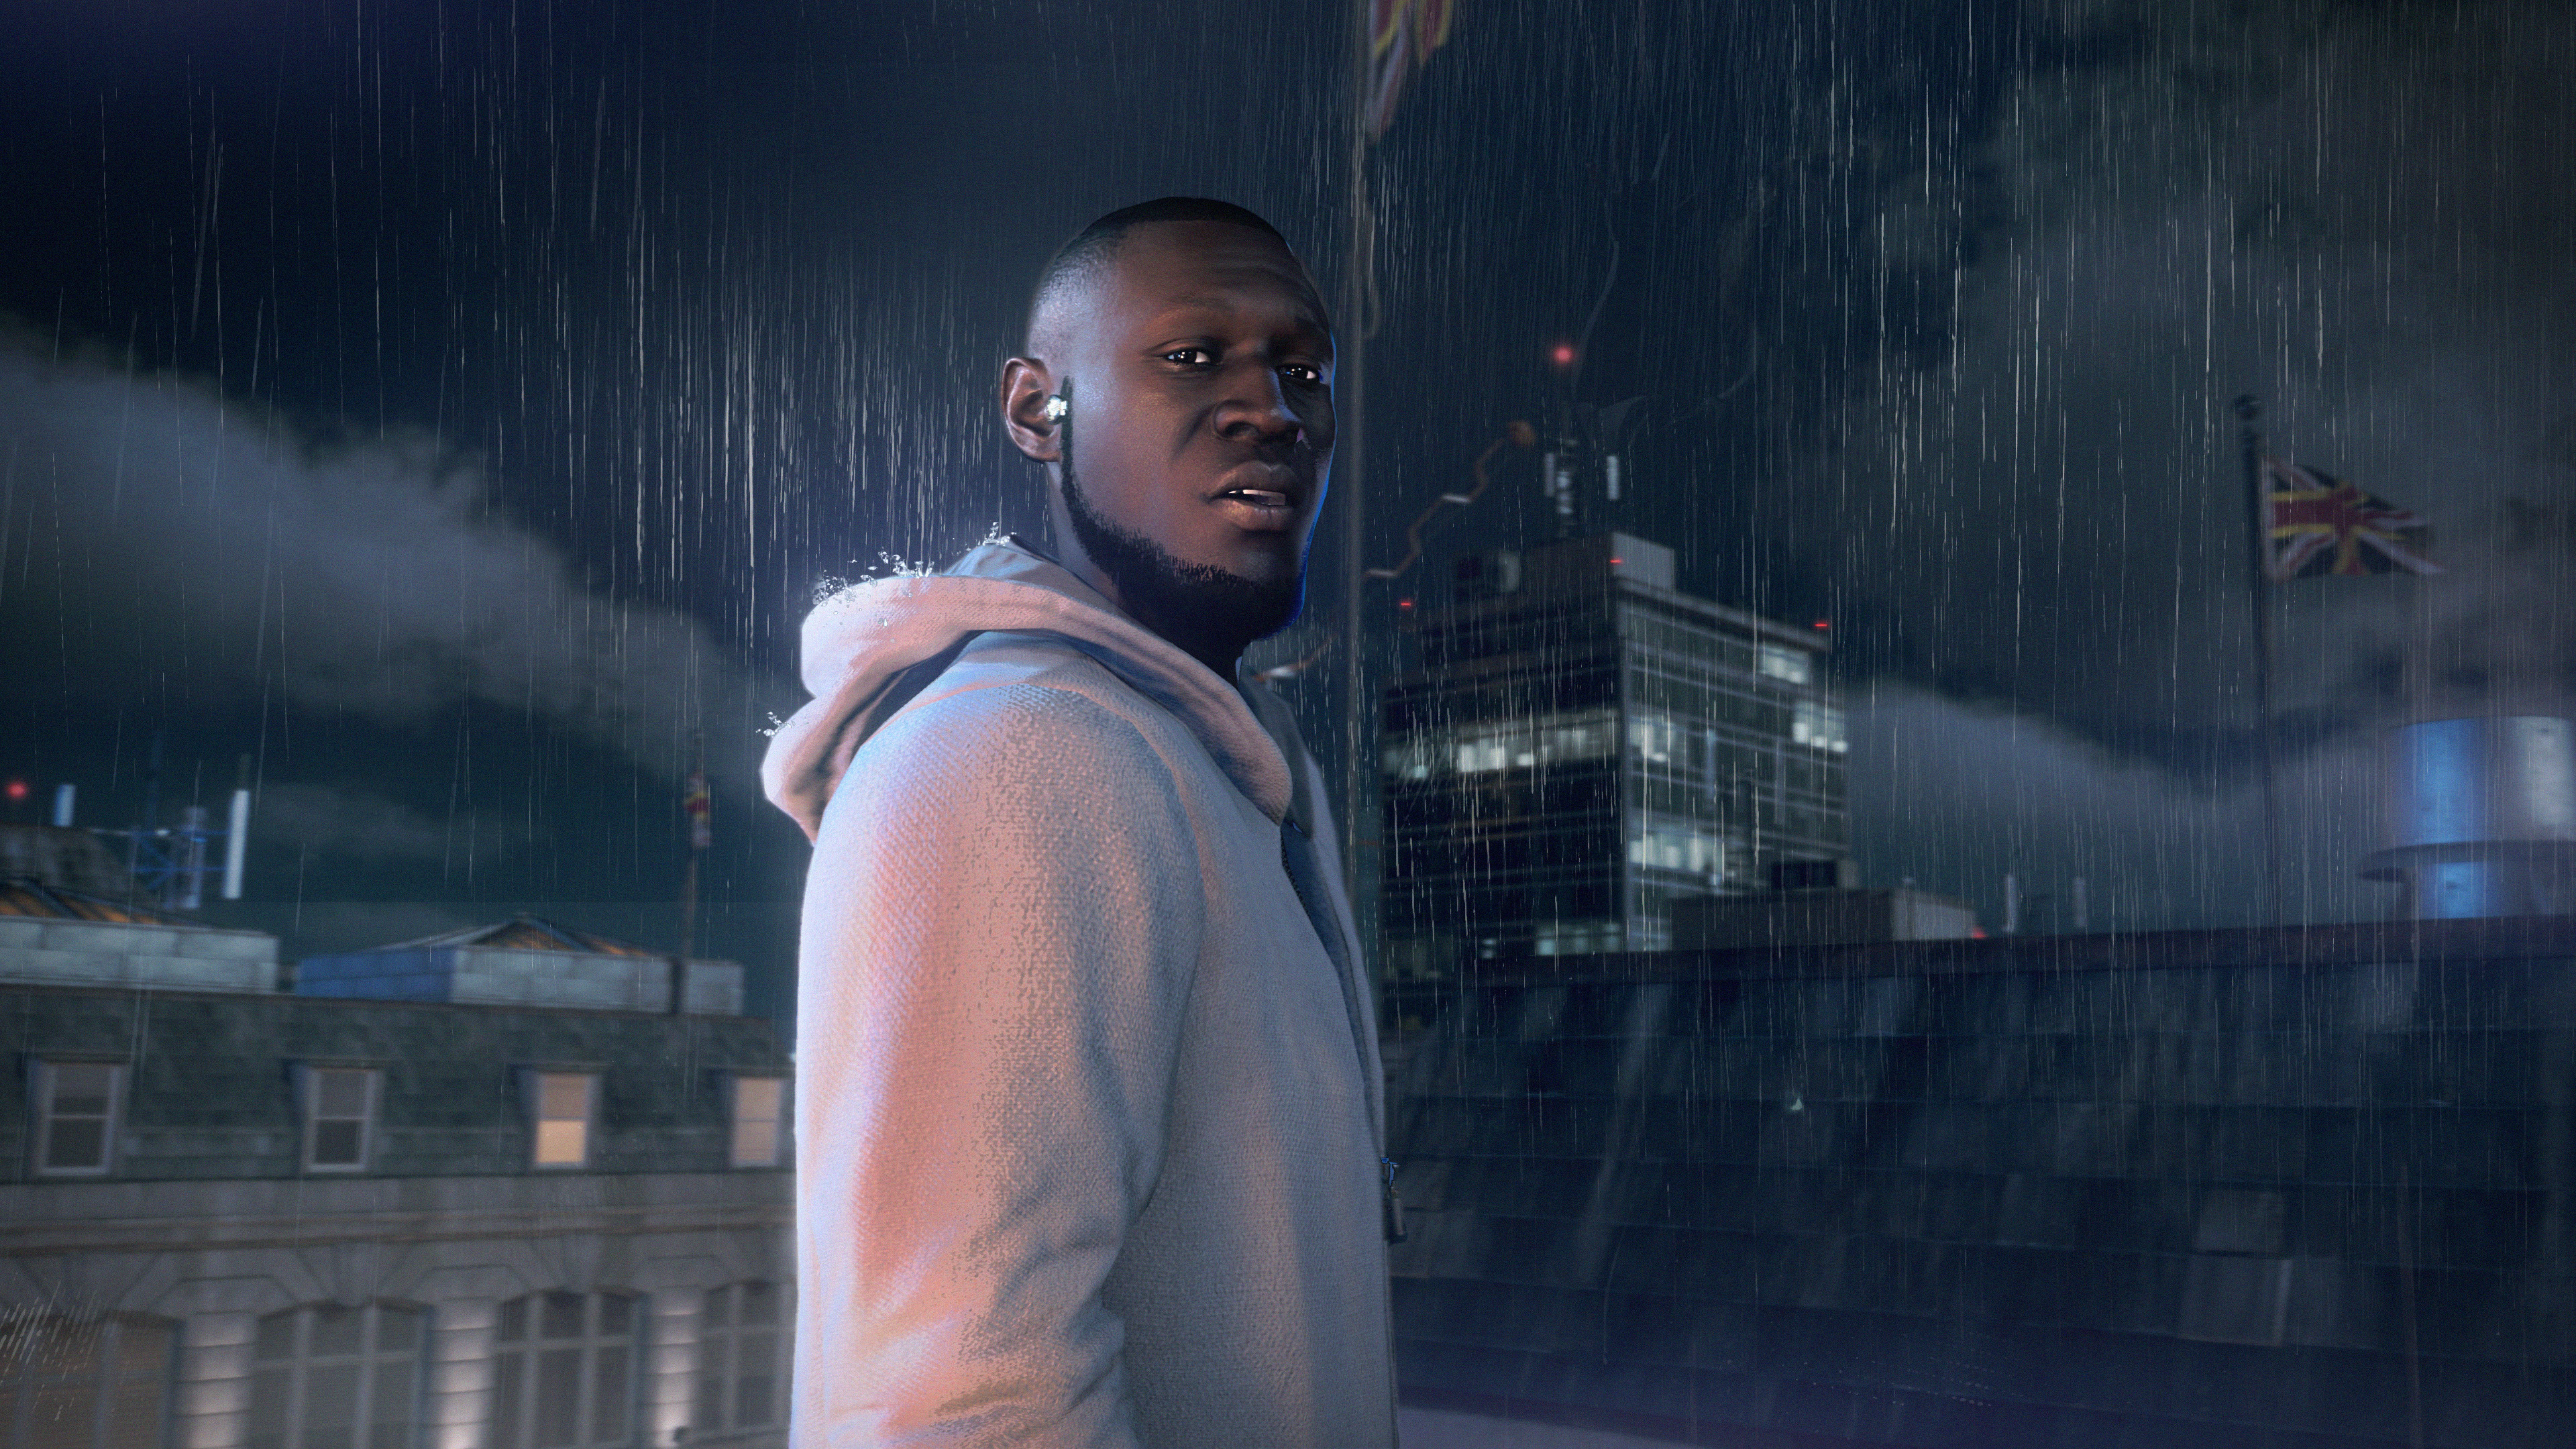 2560x1080 Stormzy Watch Dogs Legion Recruits 2560x1080 Resolution Wallpaper Hd Games 4k Wallpapers Images Photos And Background Wallpapers Den